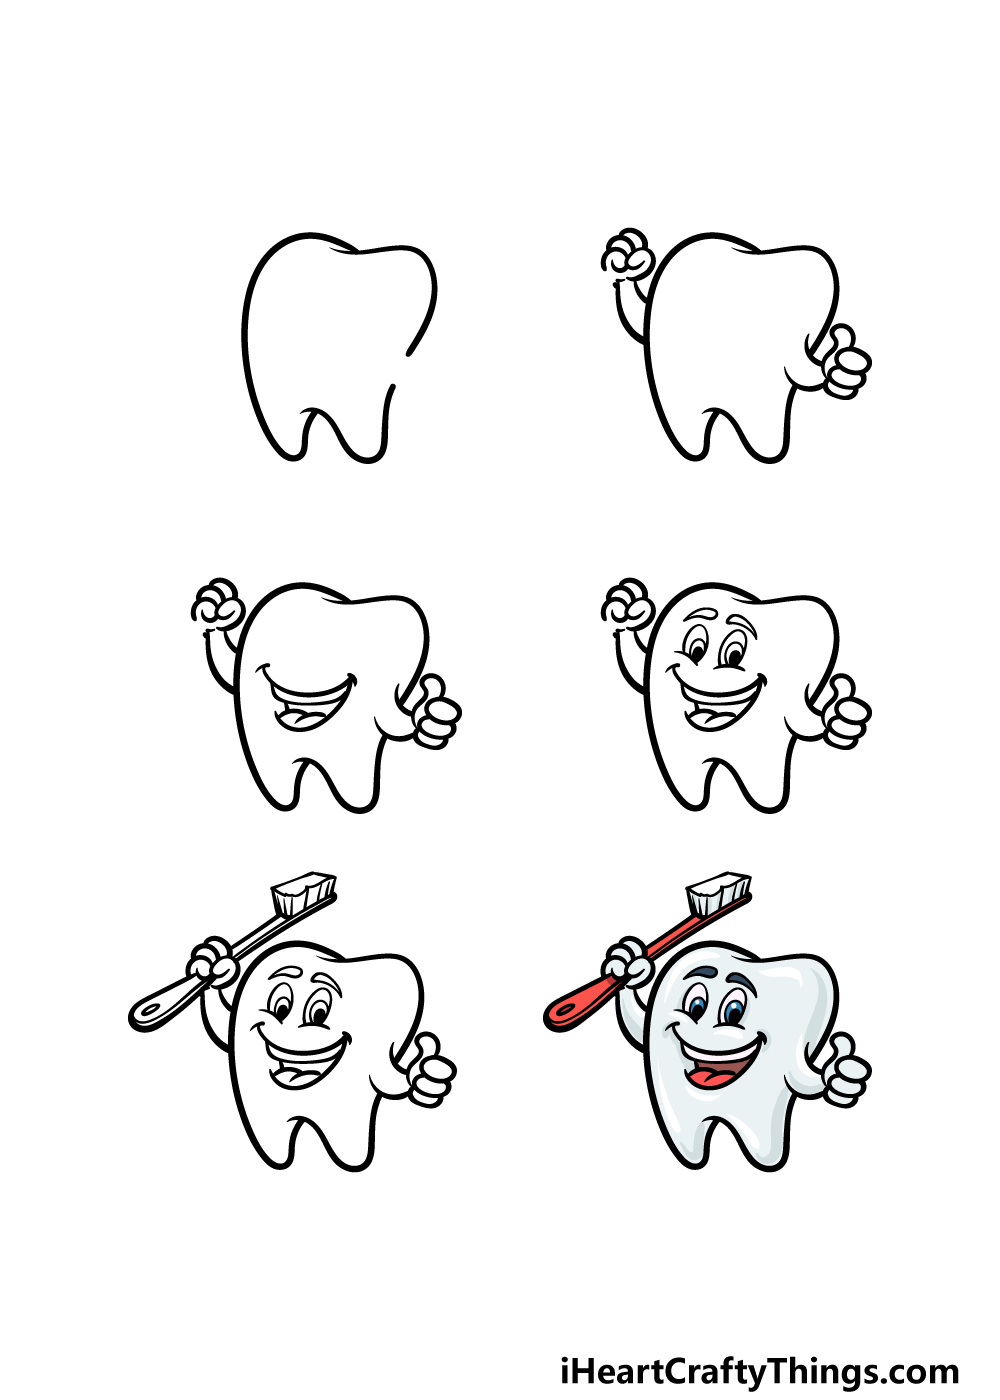 Cartoon Tooth Drawing - How To Draw A Cartoon Tooth Step By Step